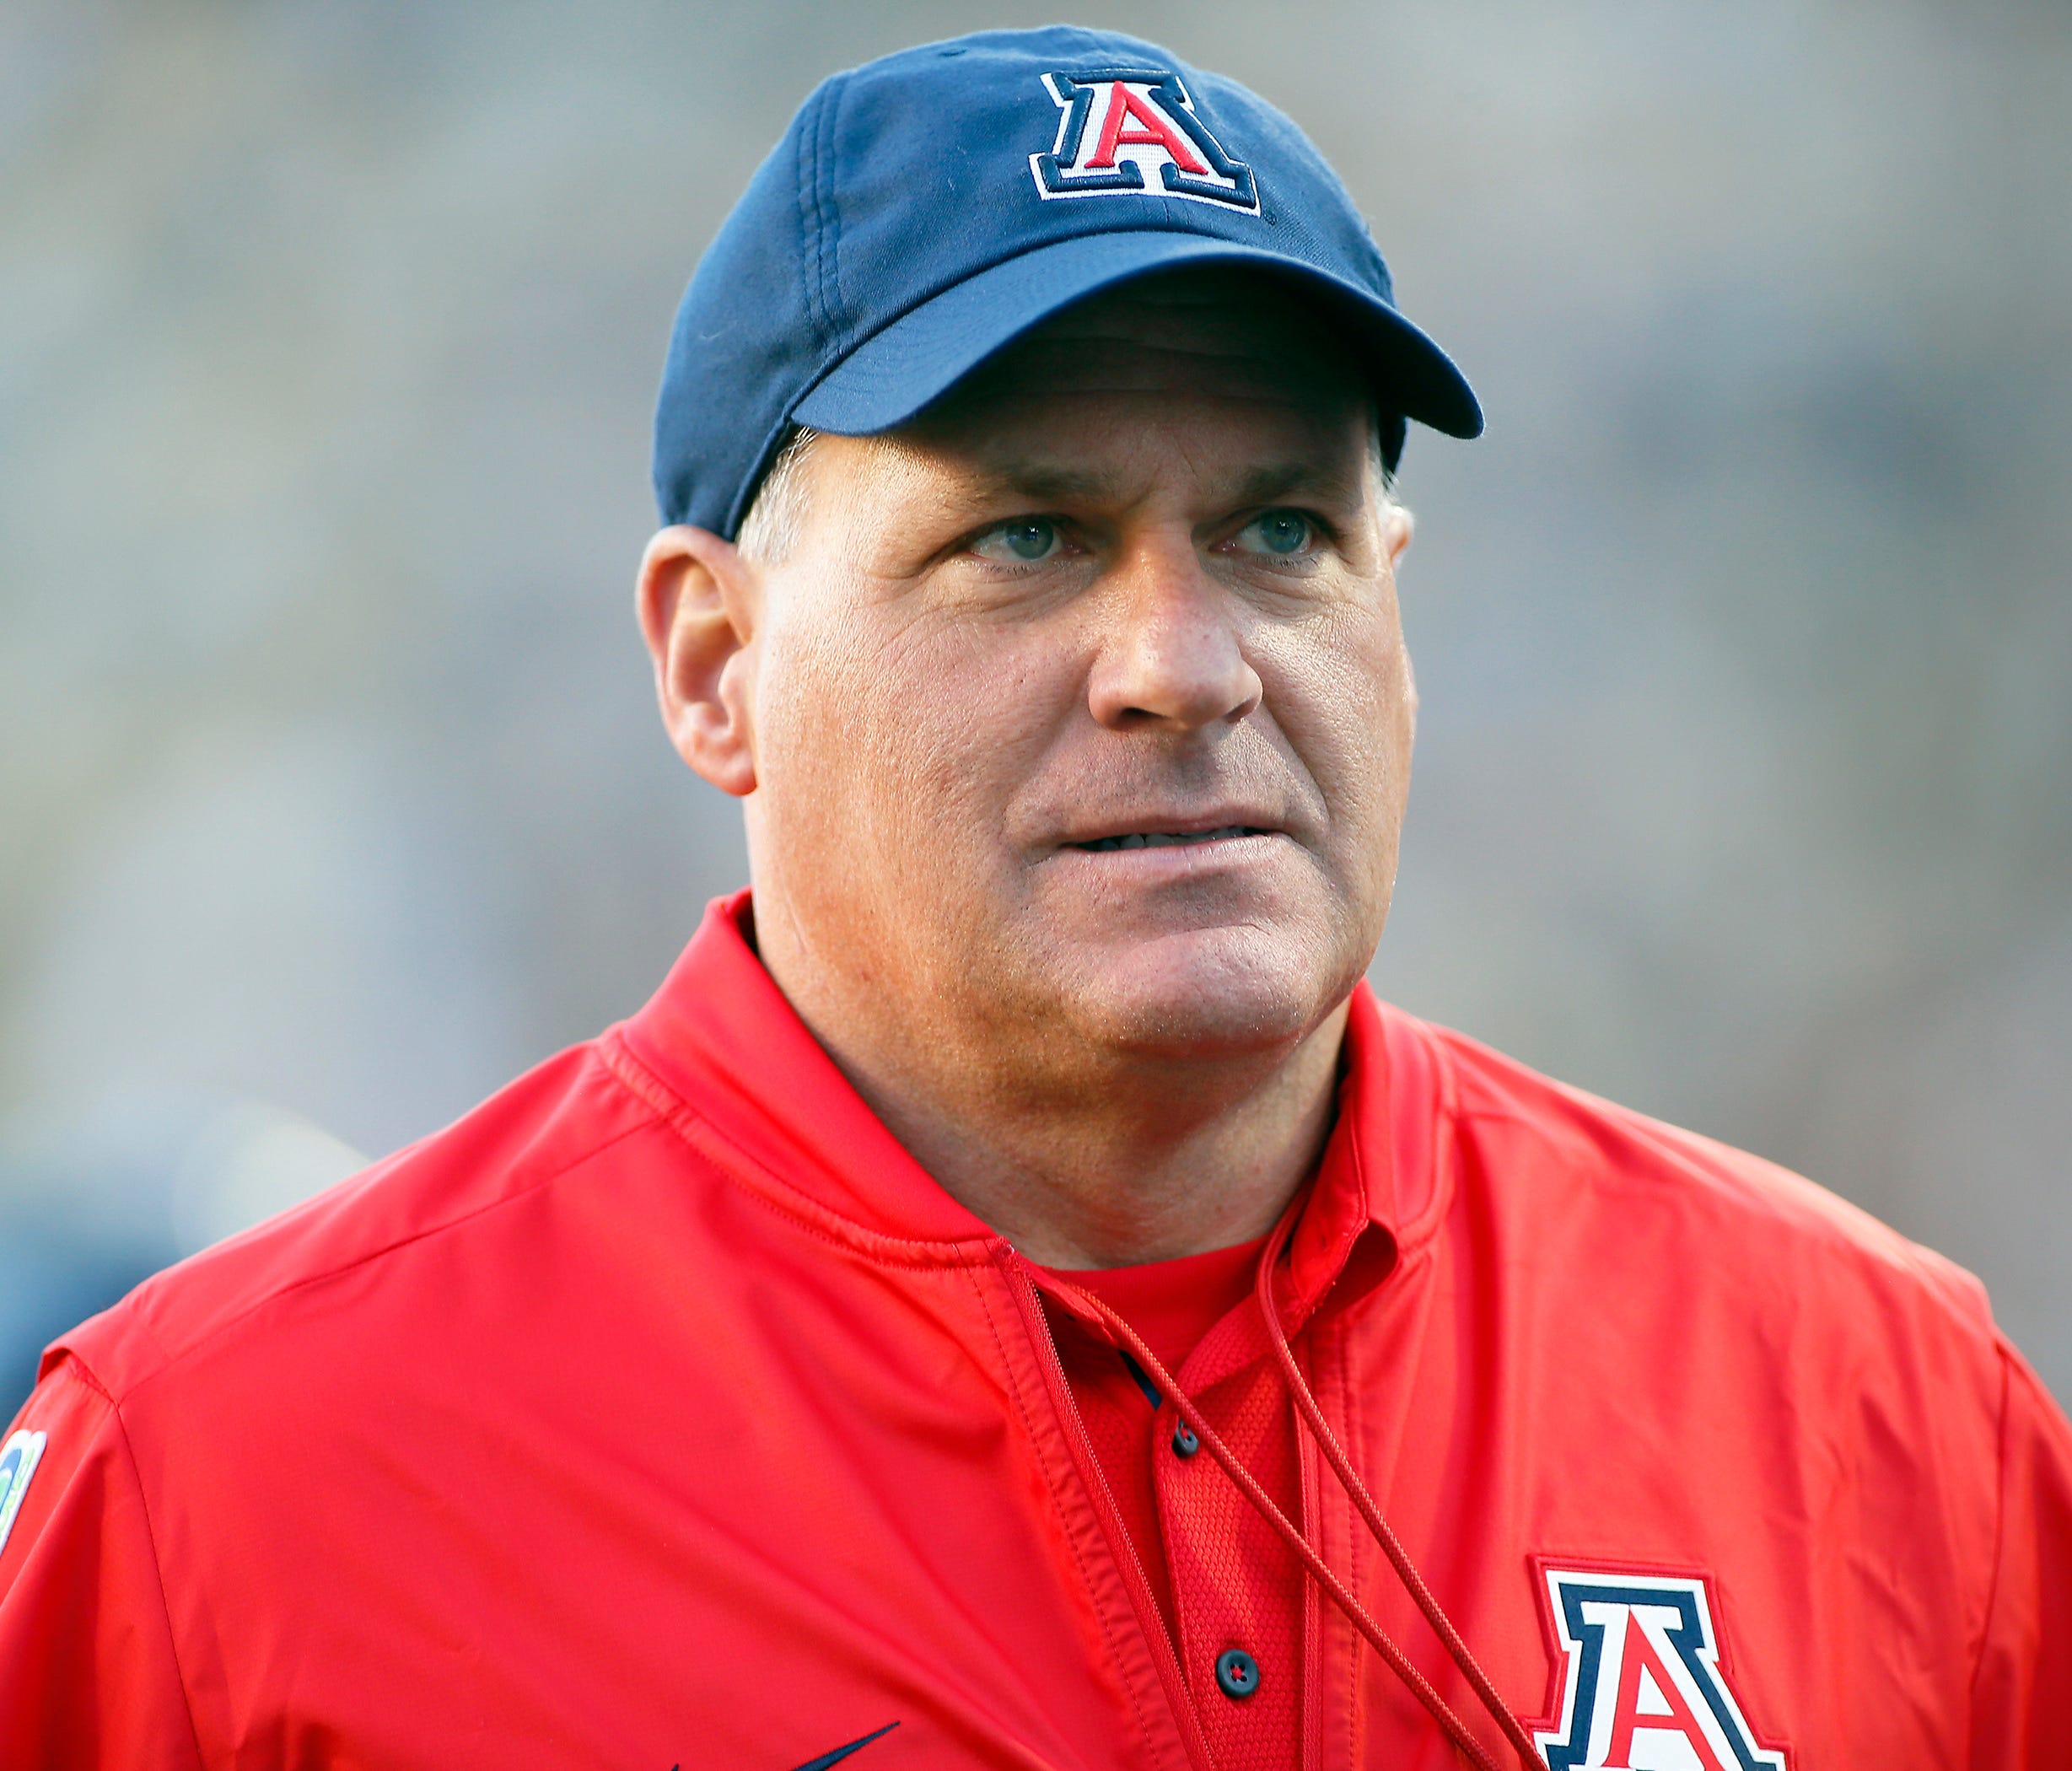 Oct 7, 2017; Boulder, CO, USA; Arizona Wildcats head coach Rich Rodriguez stands on the field prior to a game against the Colorado Buffaloes at Folsom Field. Mandatory Credit: Russell Lansford-USA TODAY Sports